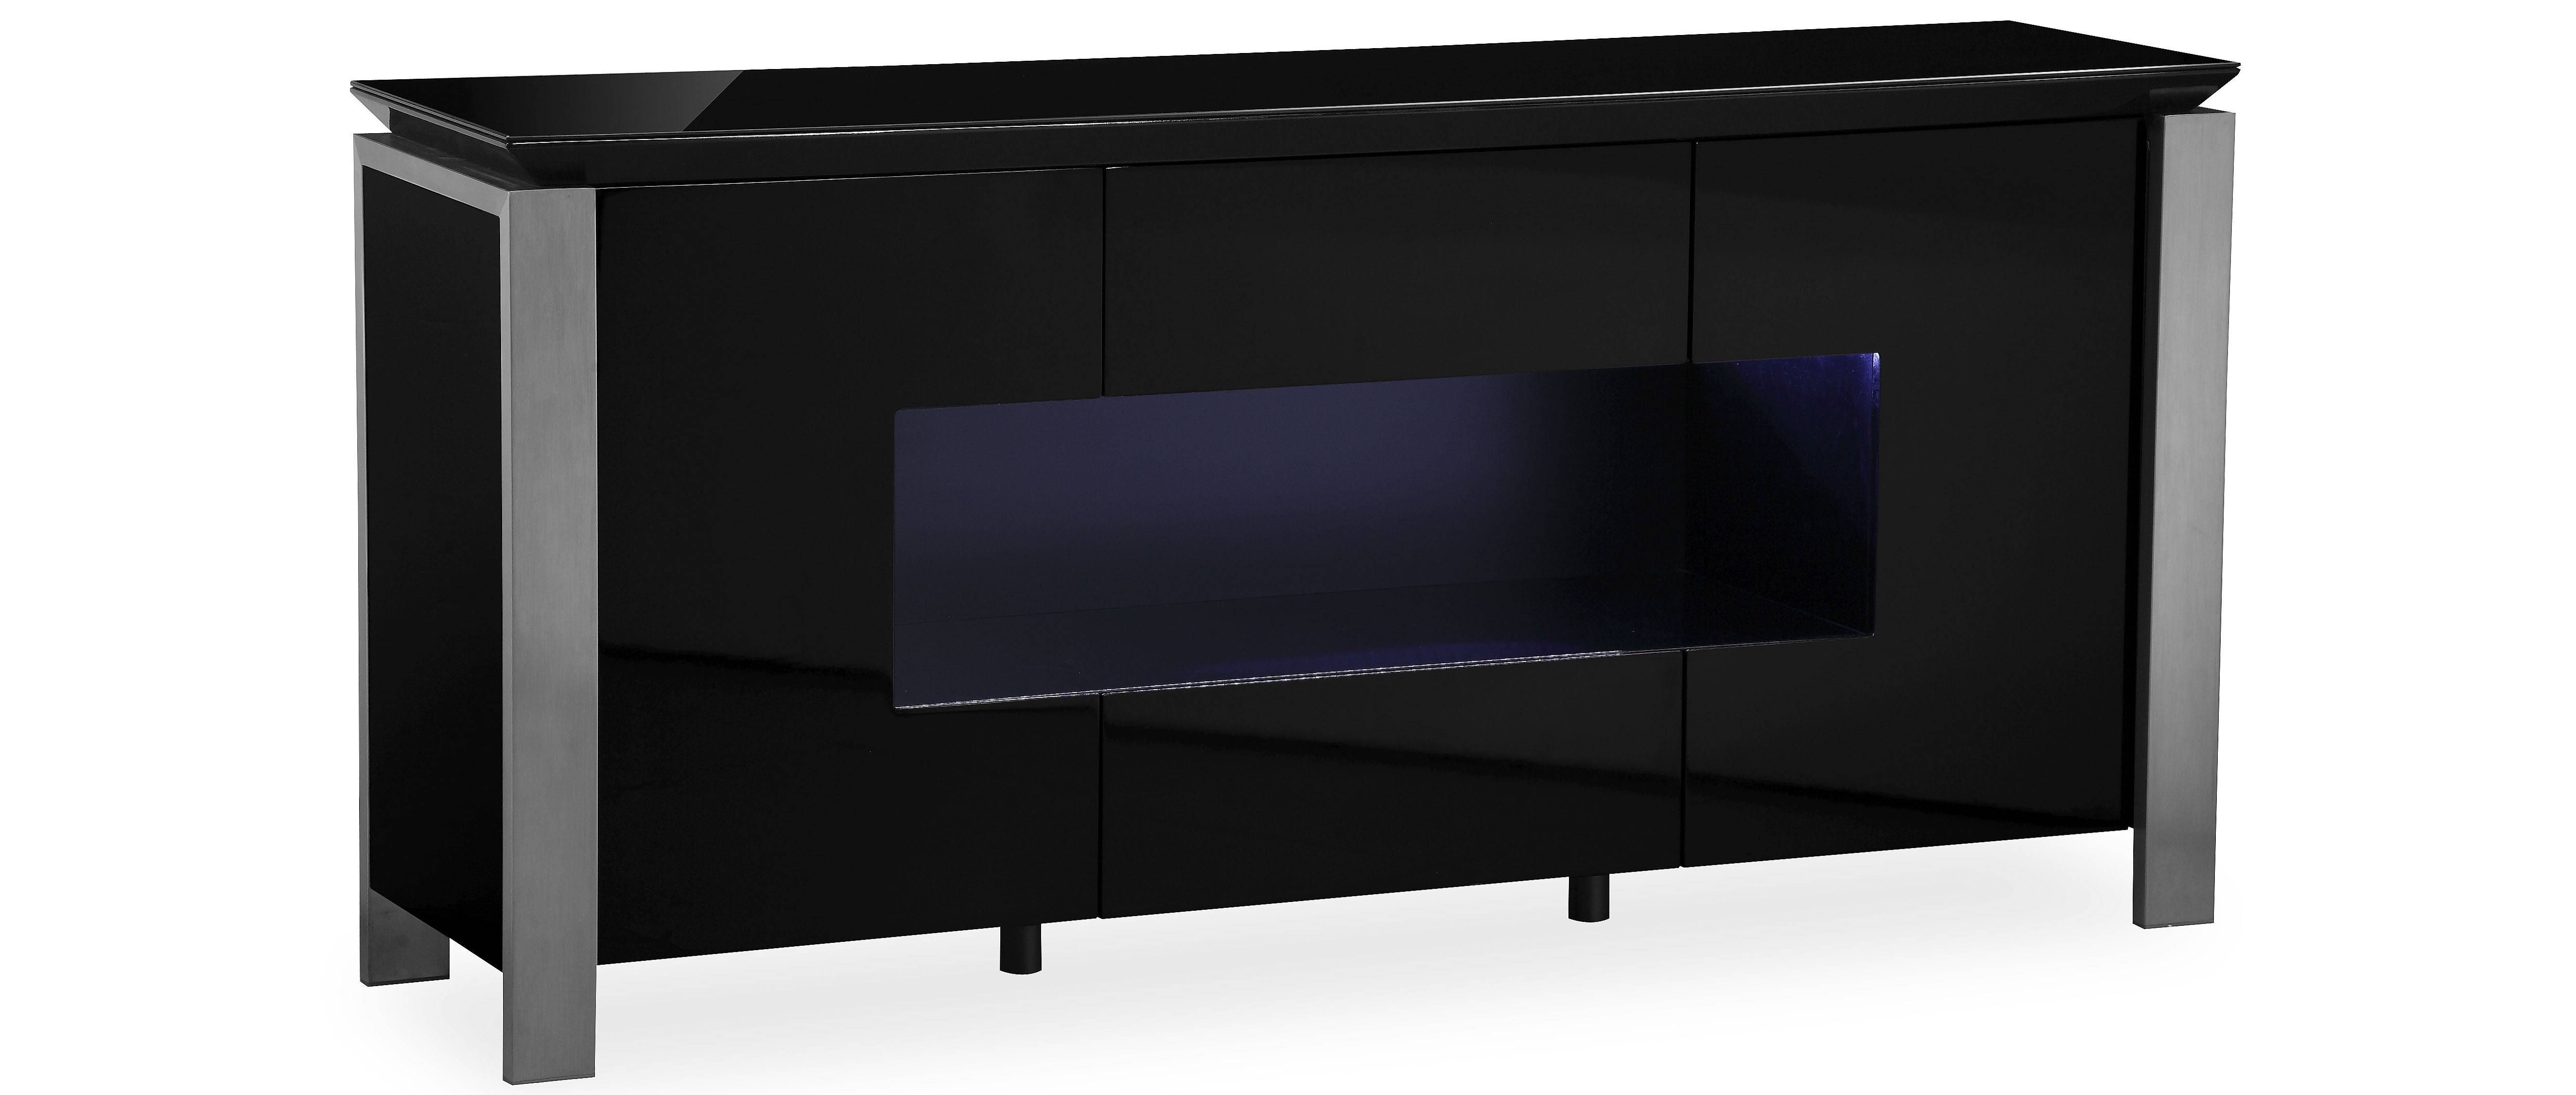 Tribeca L E D Display Sideboard Black High Gloss With Regard To Black Gloss Sideboards 